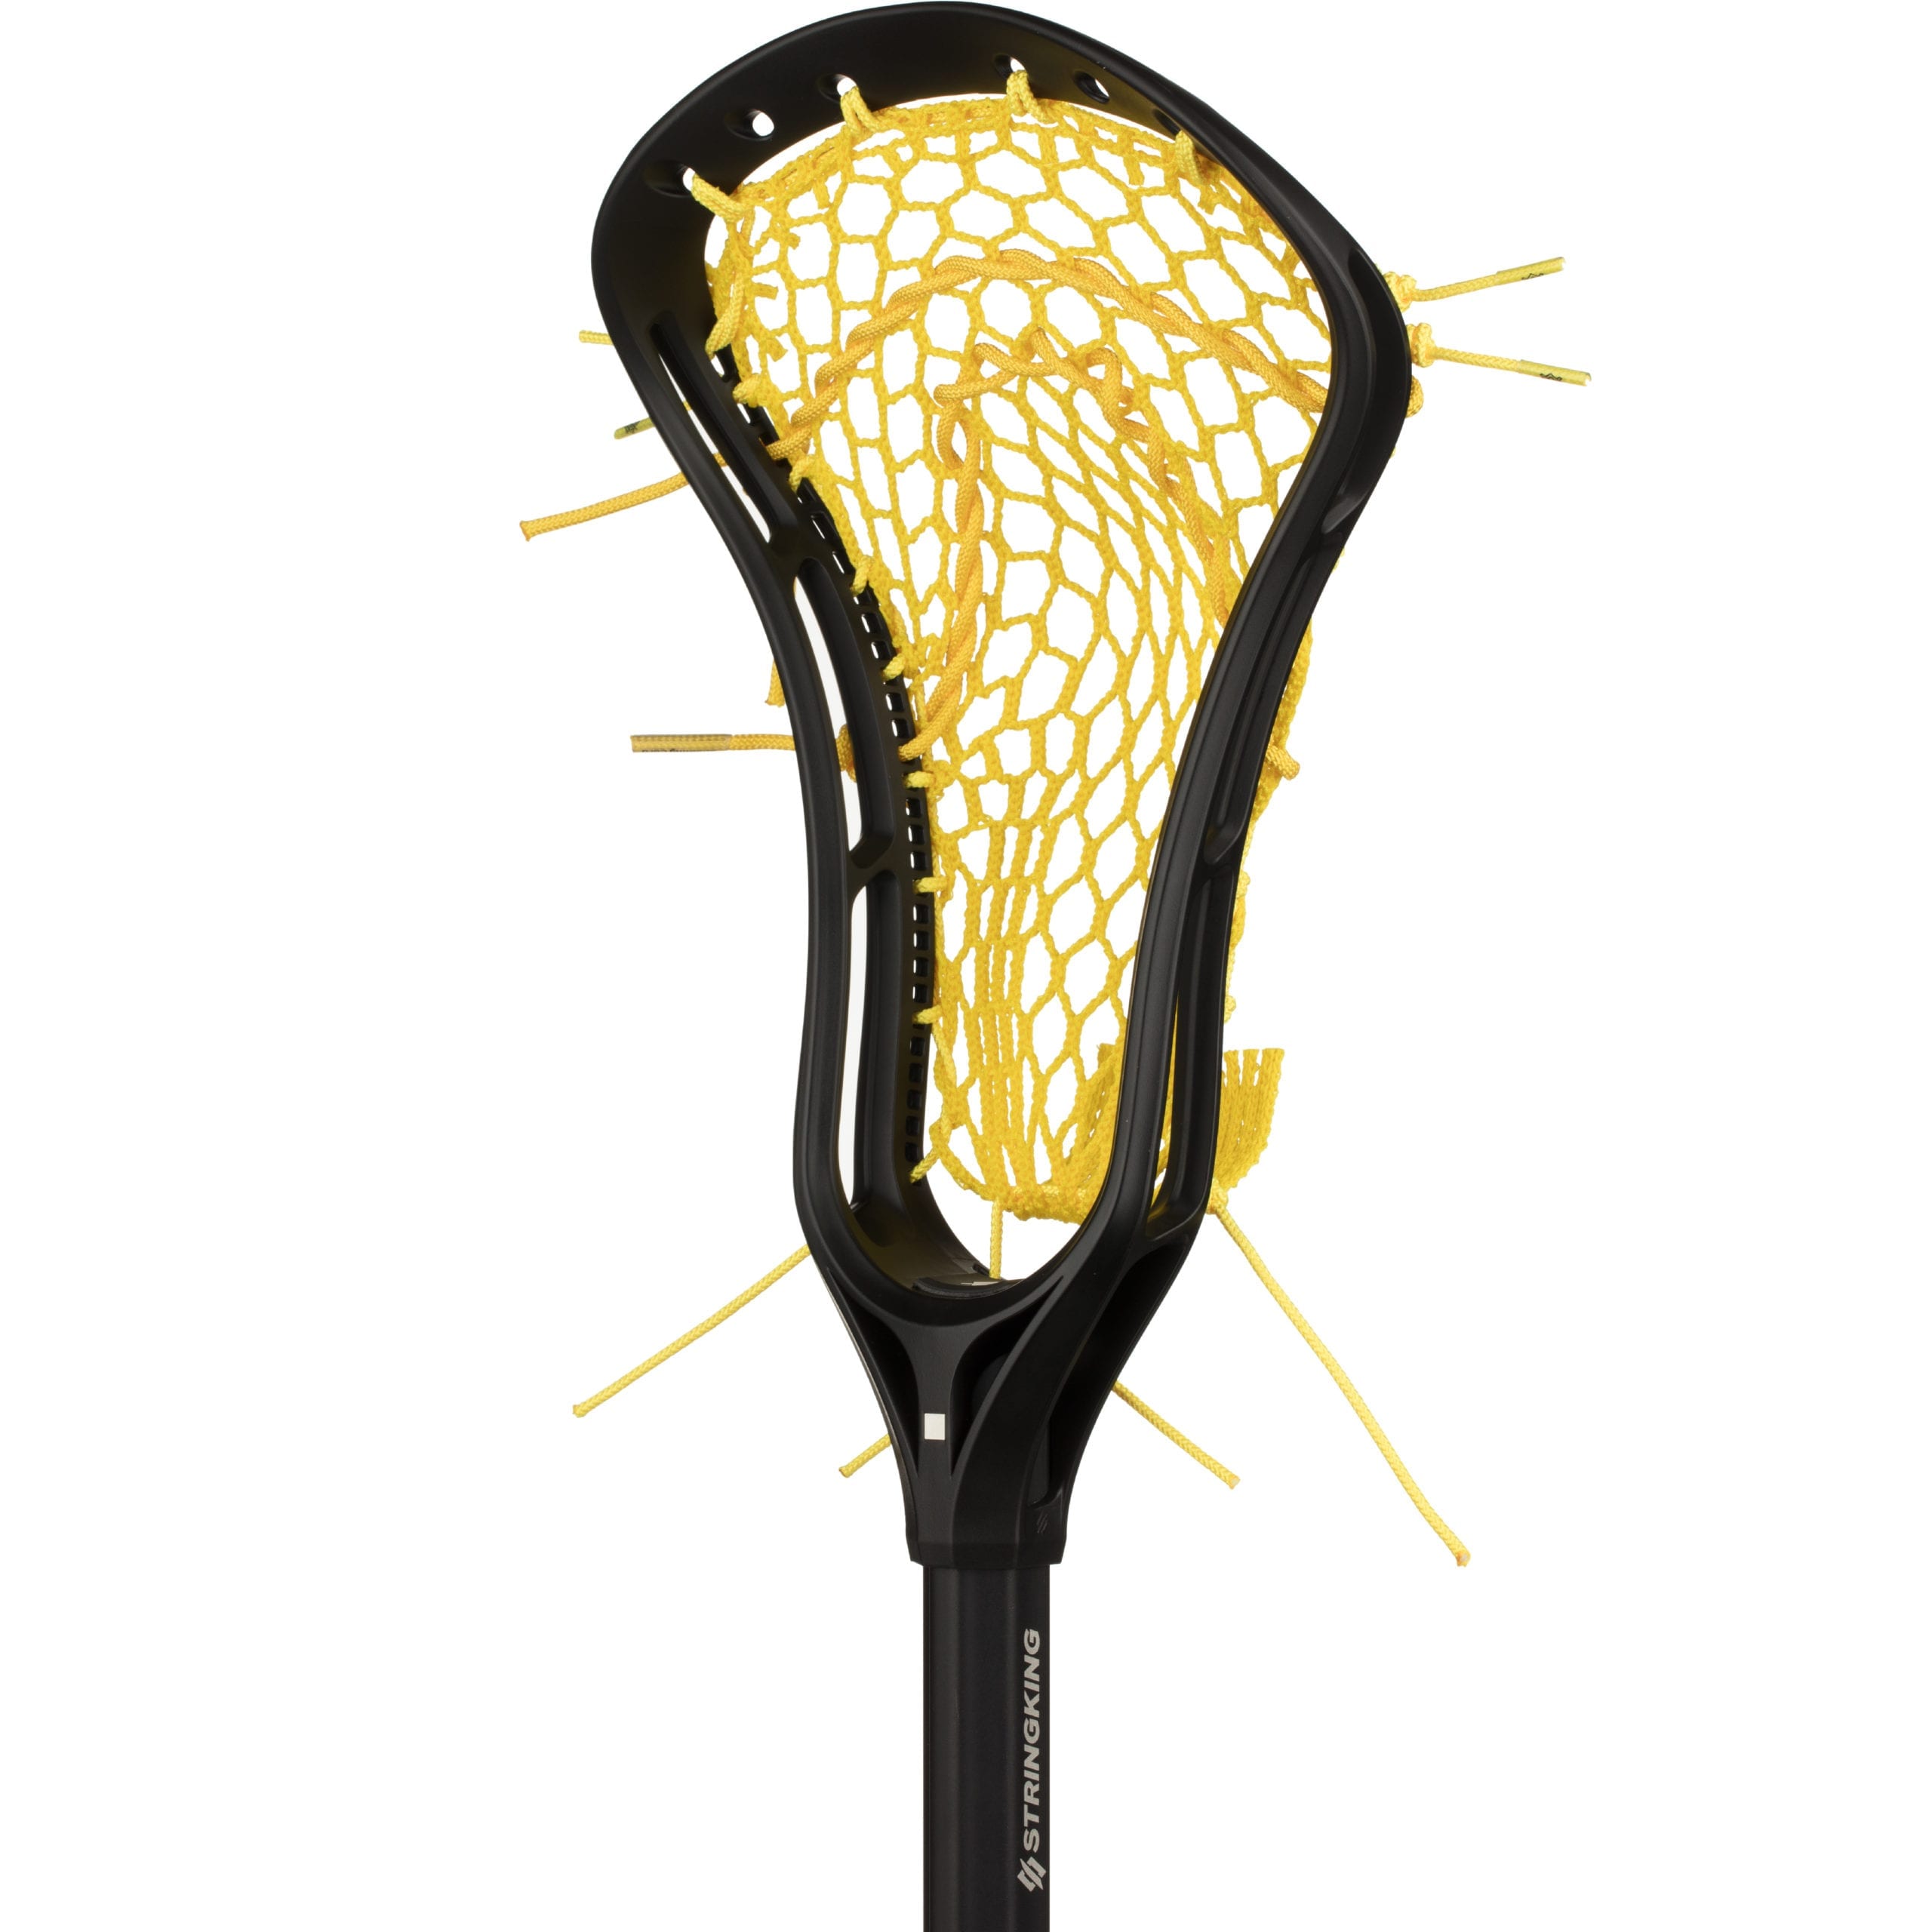 StringKing-Womens-Complete-Lacrosse-Stick-Angle-Black-Yellow-4000-scaled-1.jpg